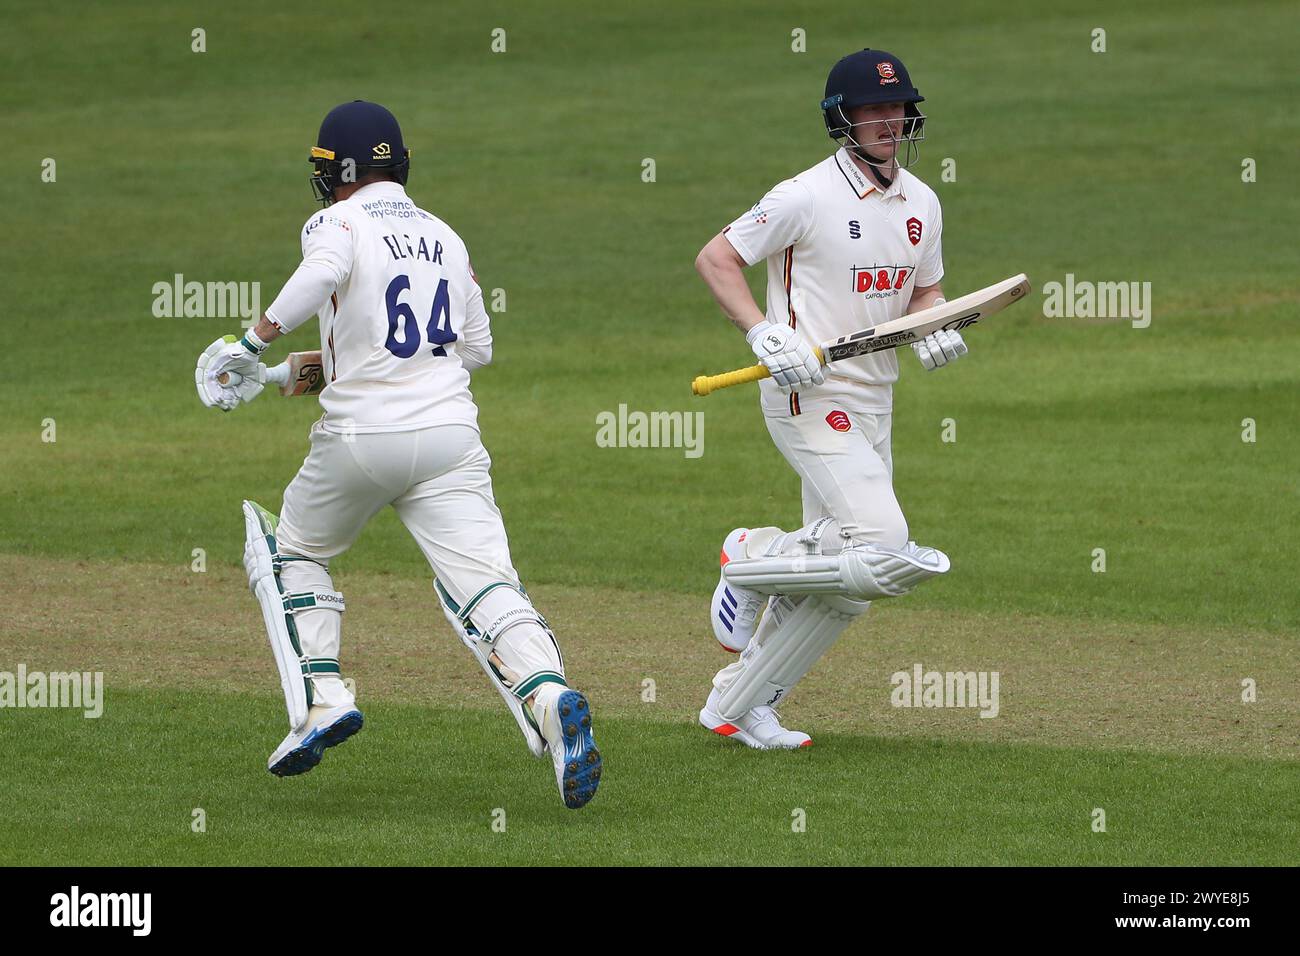 Jordan Cox (R) and Dean Elgar in batting action for Essex during Nottinghamshire CCC vs Essex CCC, Vitality County Championship Division 1 Cricket at Stock Photo